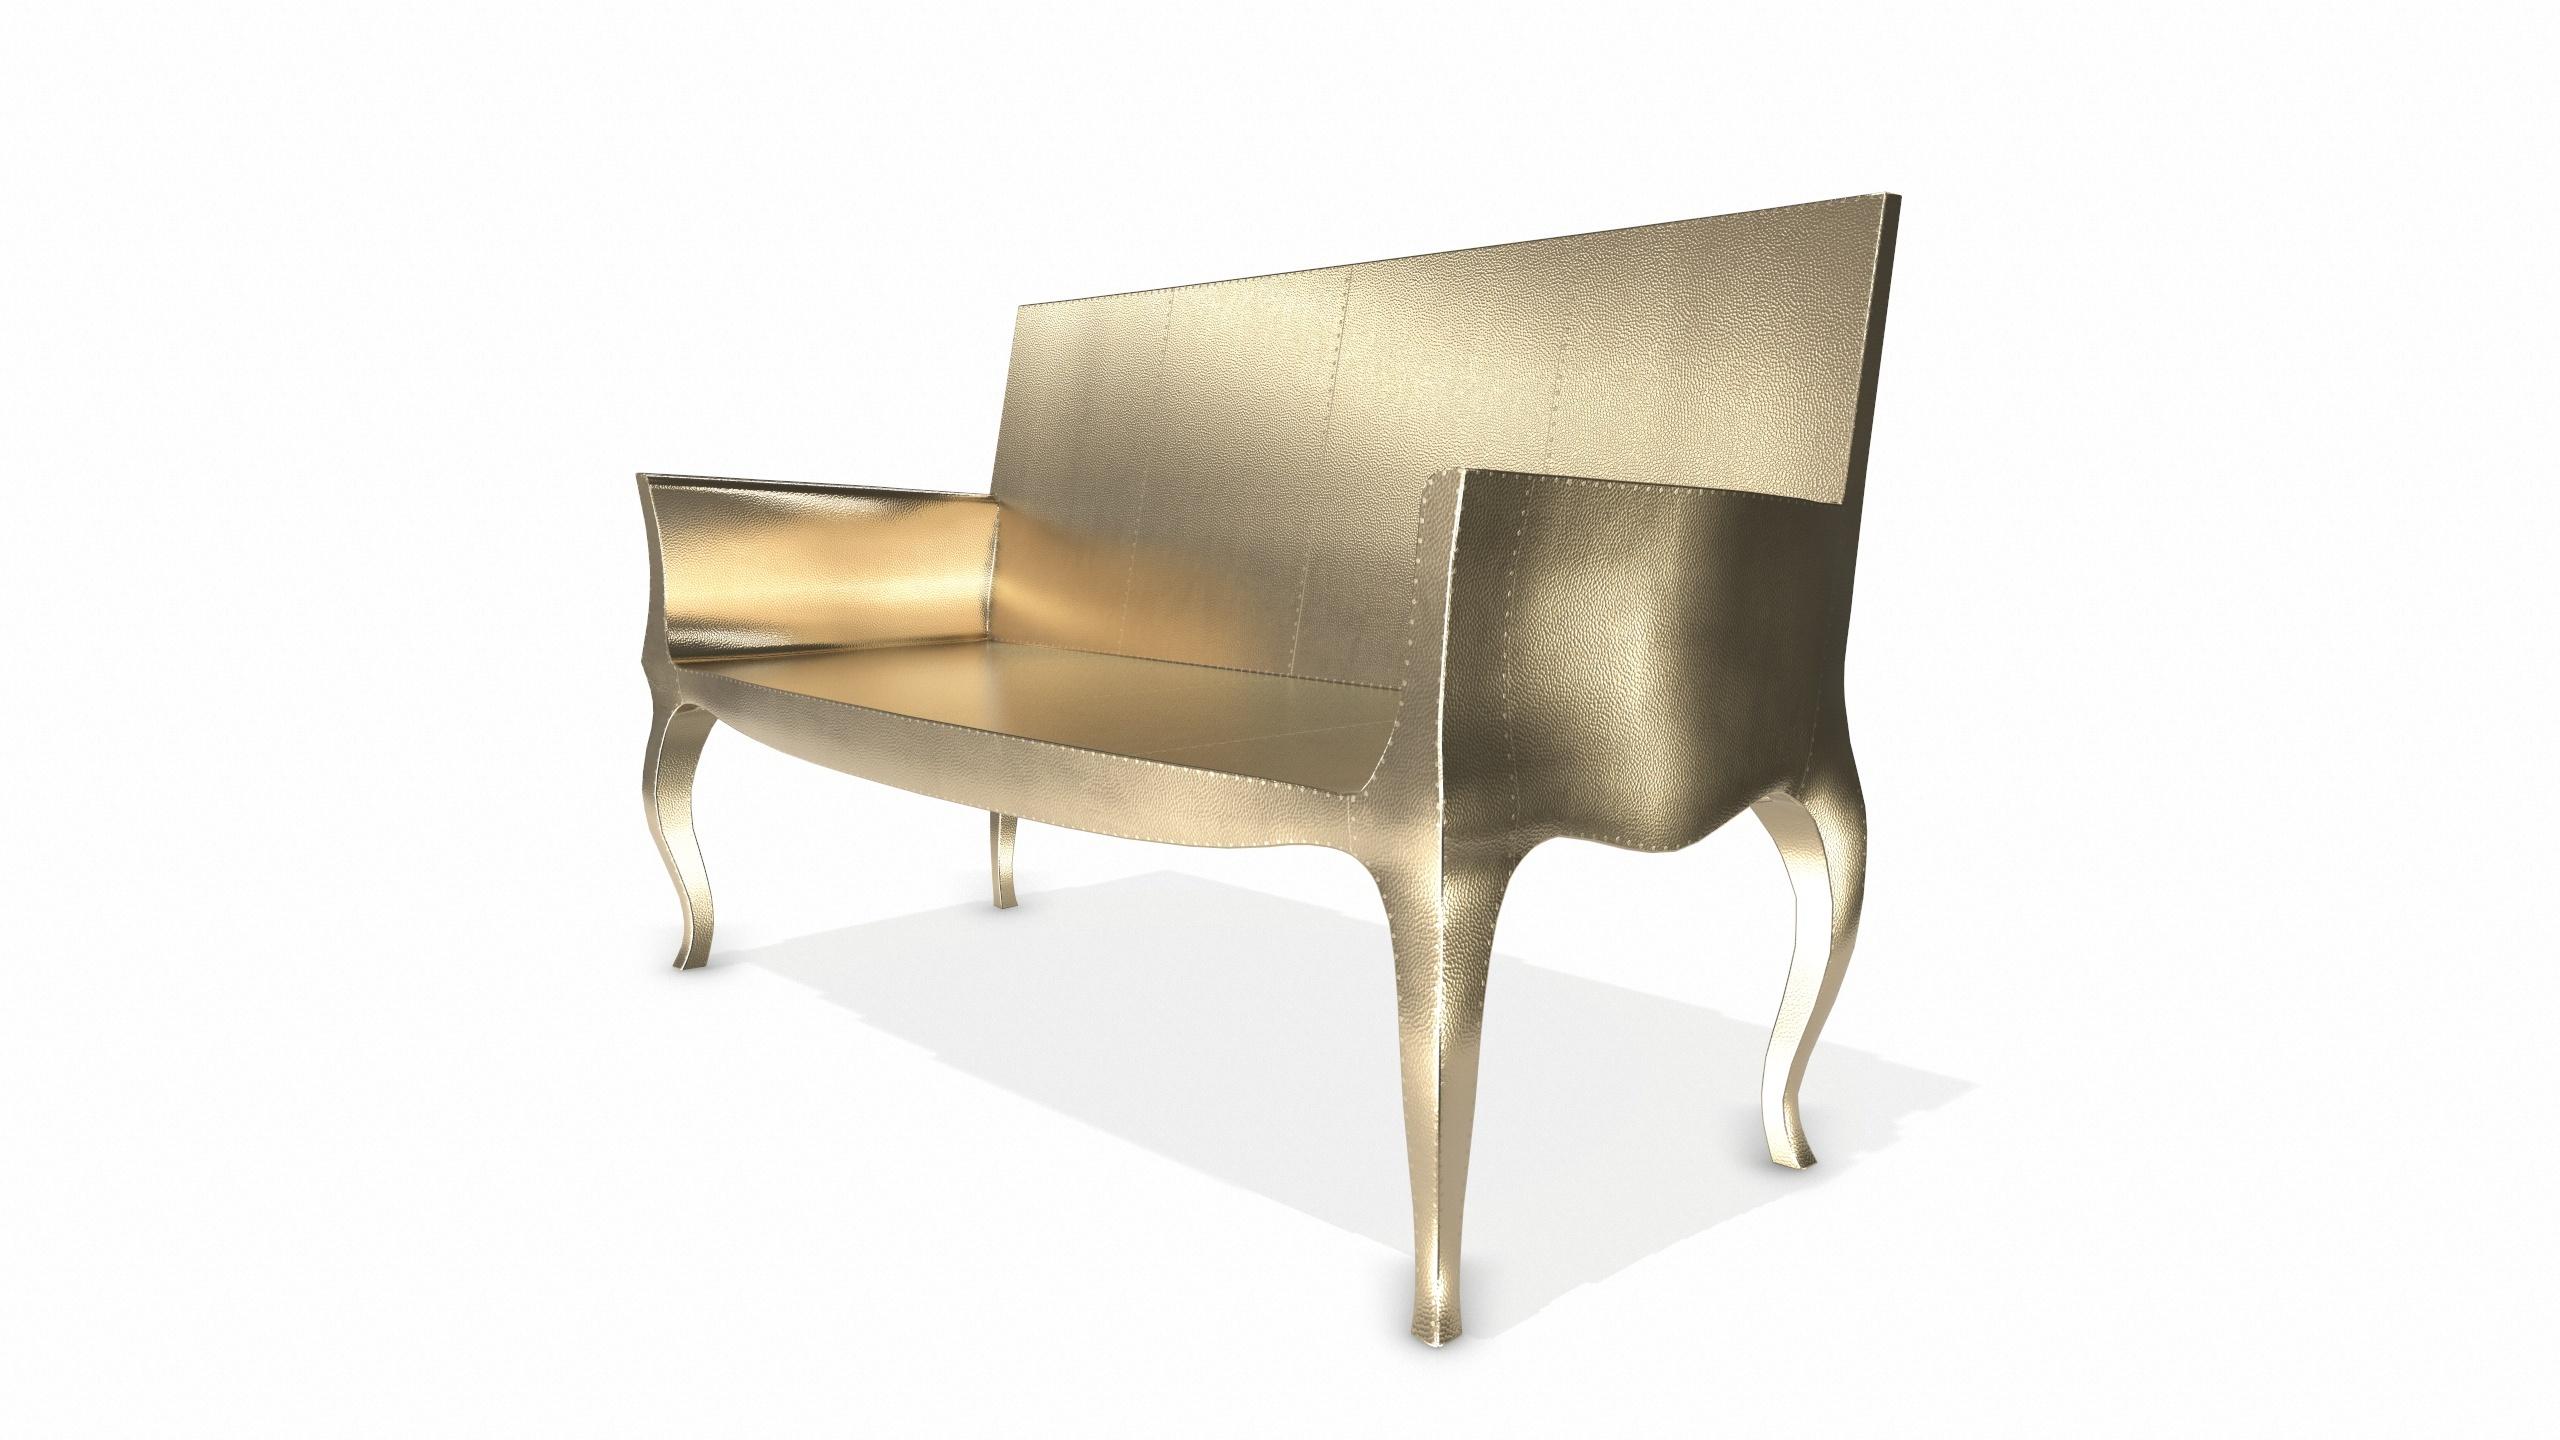 Hand-Crafted Louise Settee Art Deco Living Room Sets in Mid. Hammered Brass by Paul Mathieu For Sale